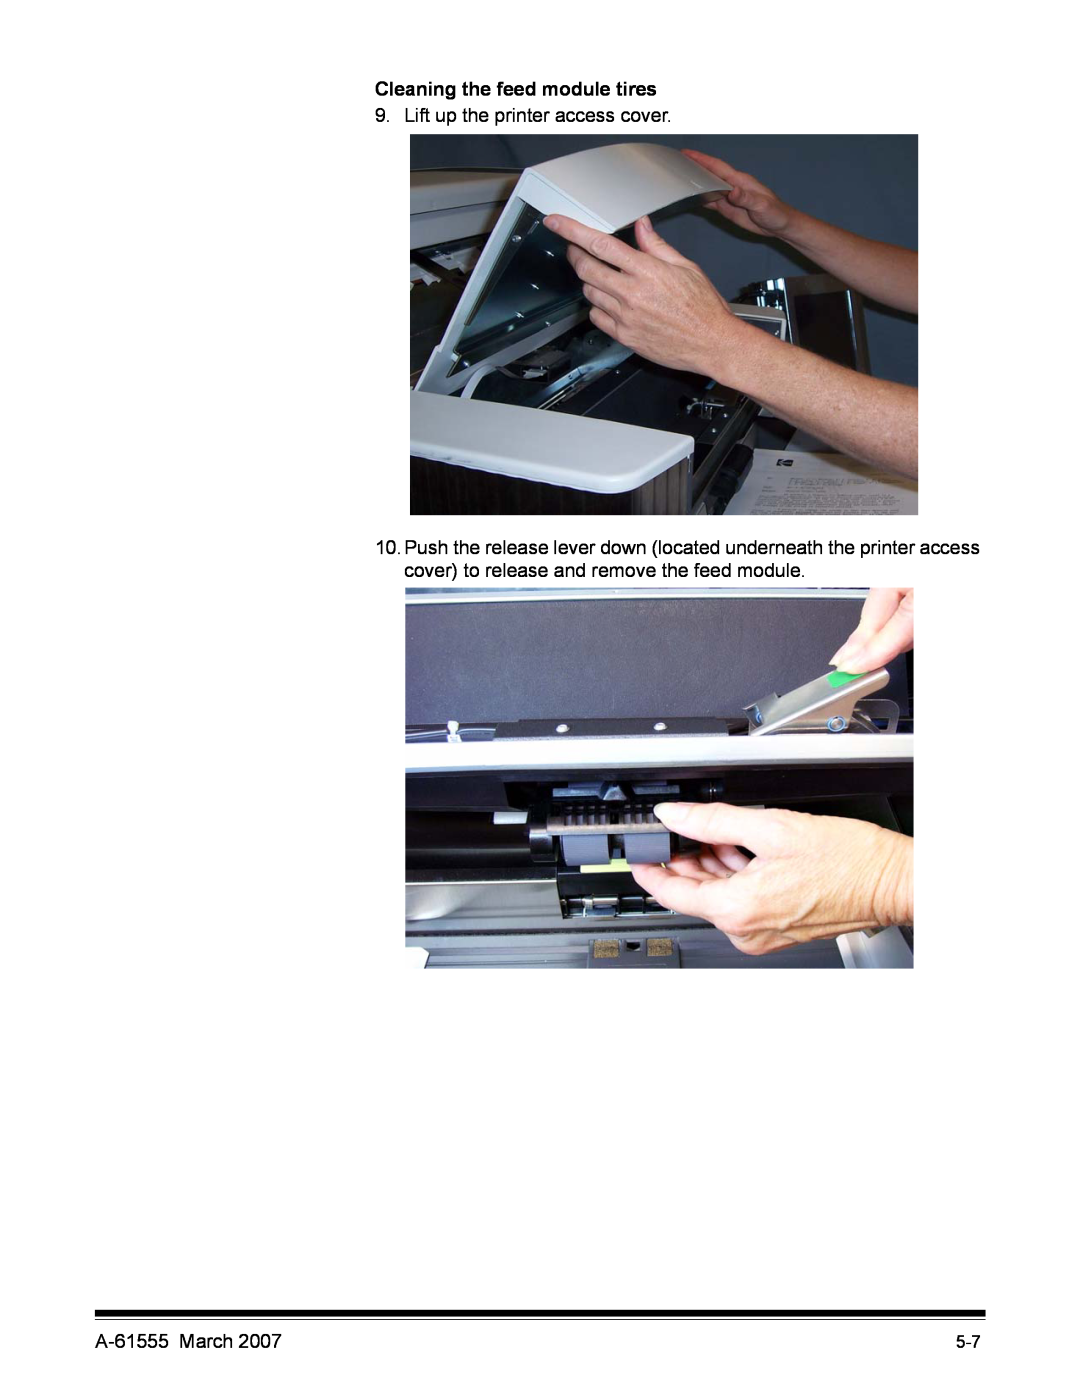 Kodak i1800 Series manual Cleaning the feed module tires, Lift up the printer access cover, A-61555March 